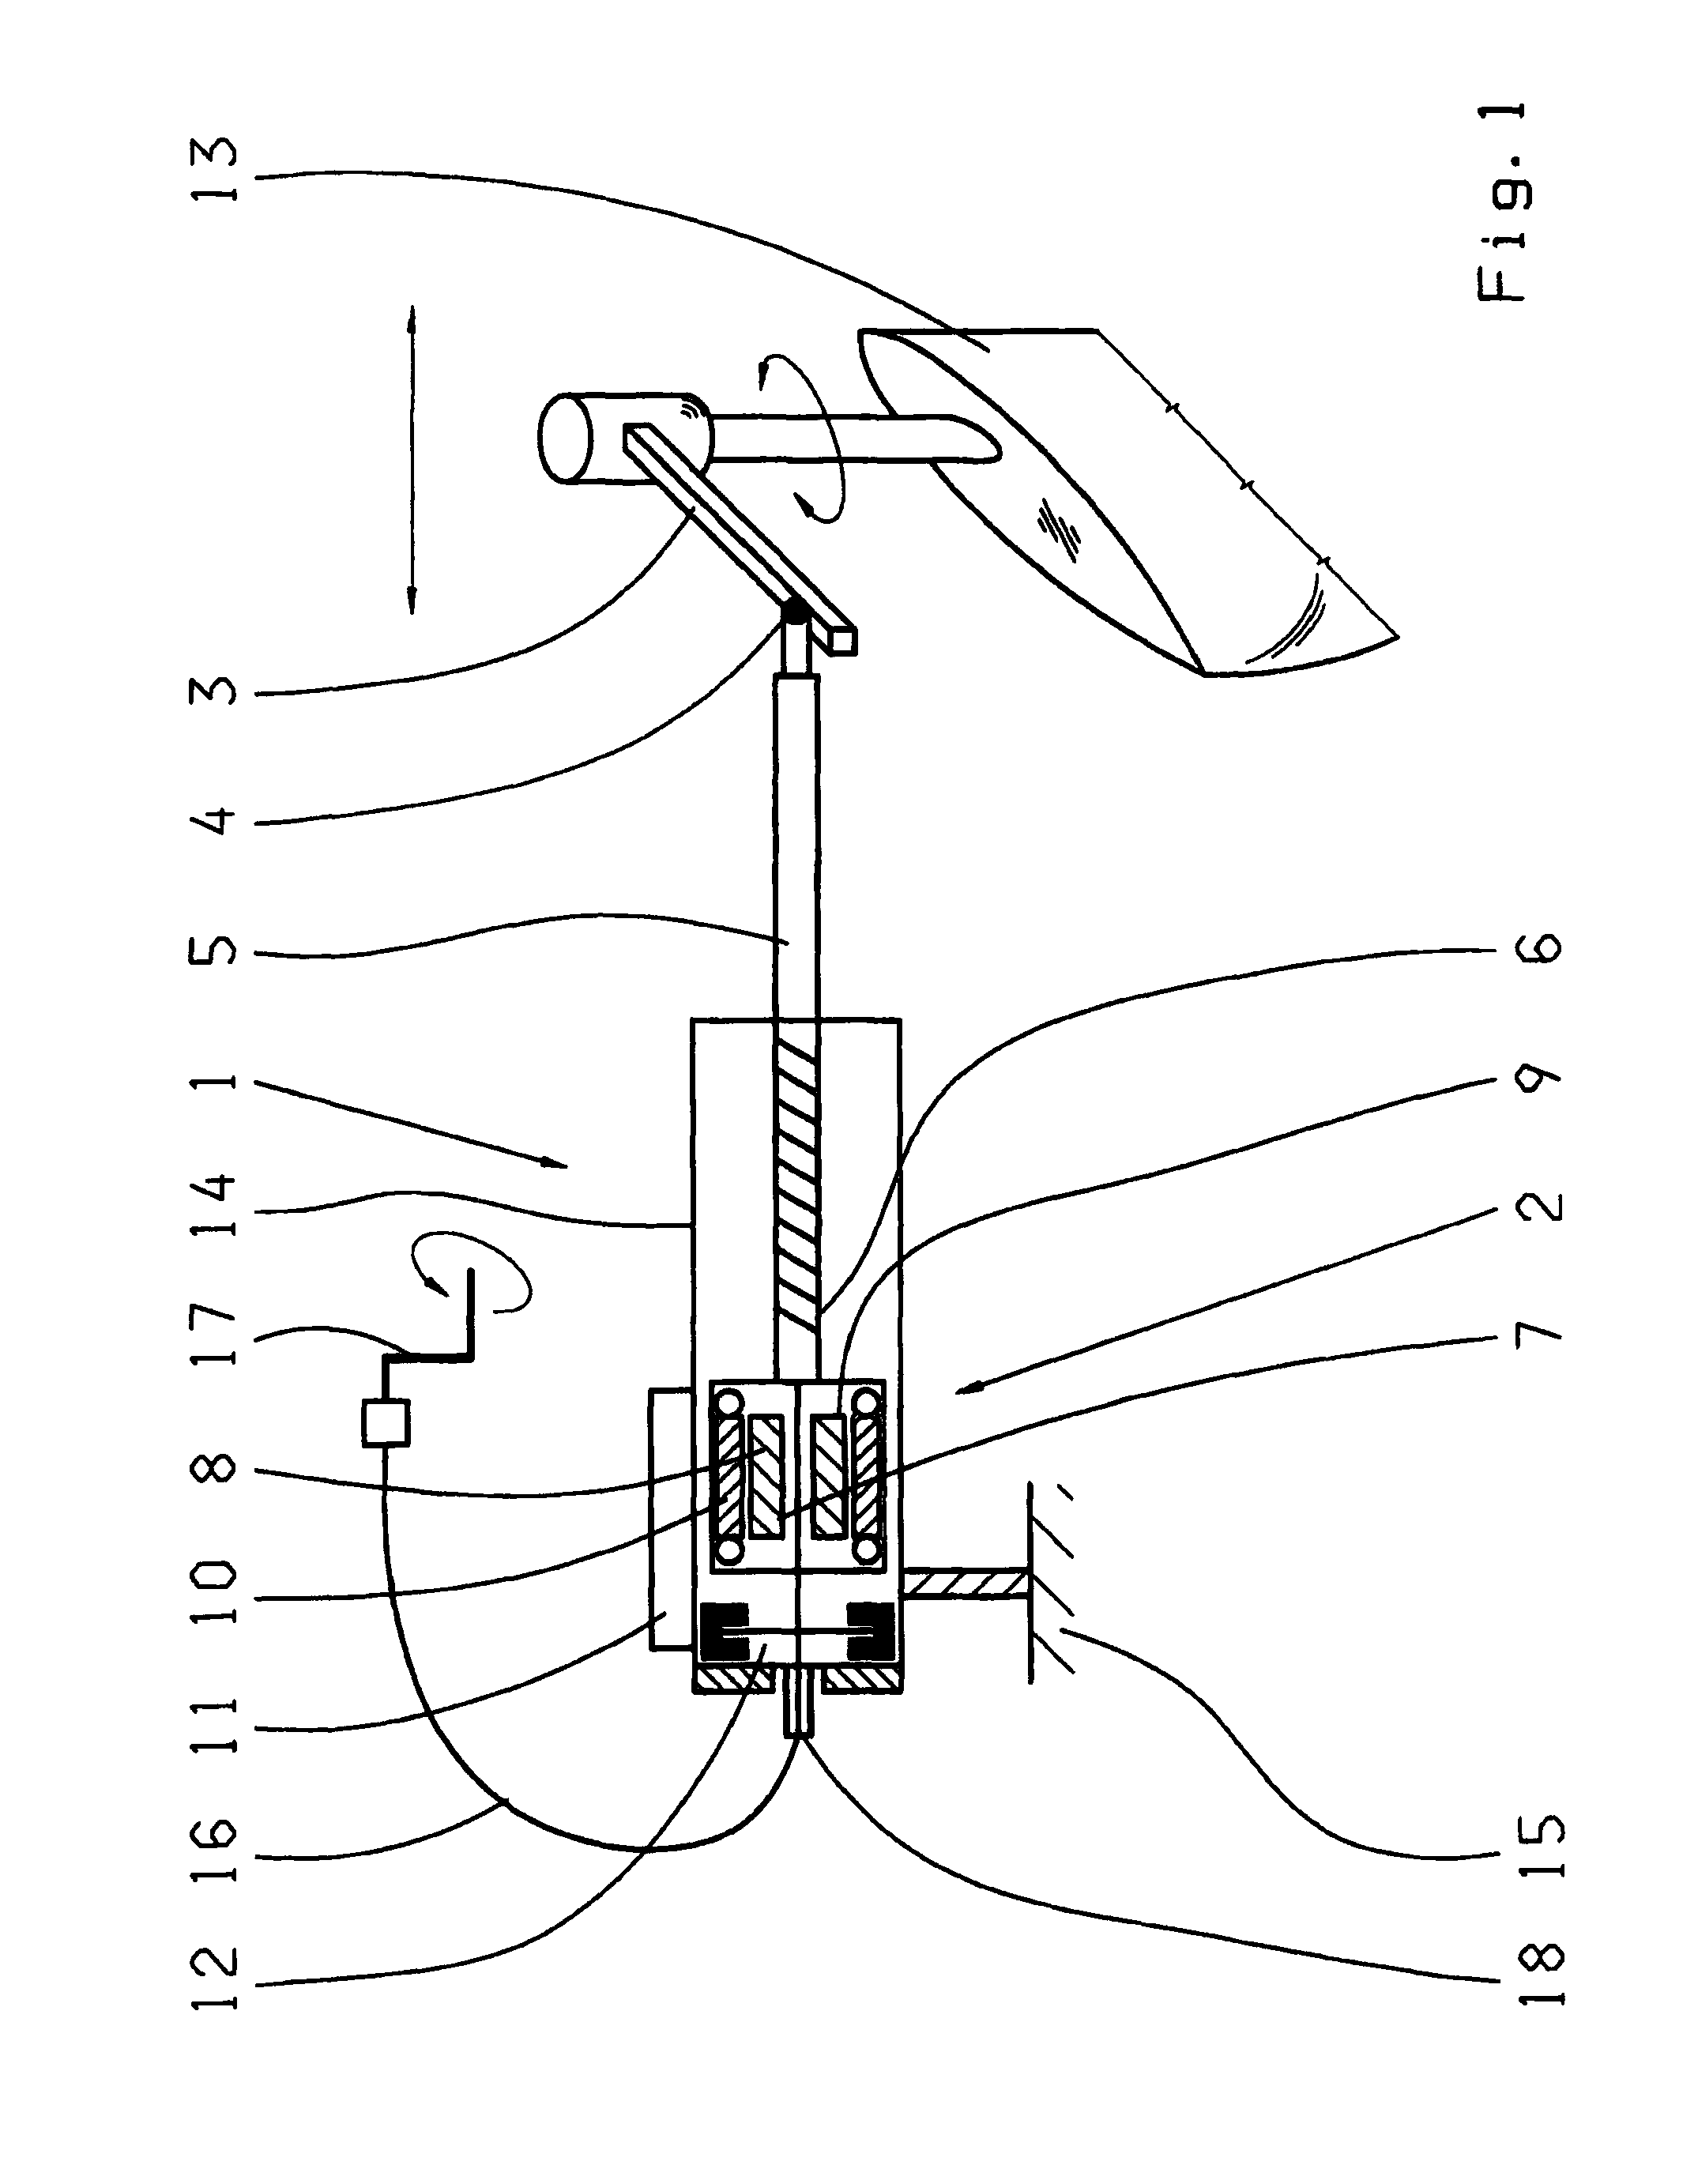 Steering actuator for a steer-by-wire ship's control system and method for operating said steering actuator